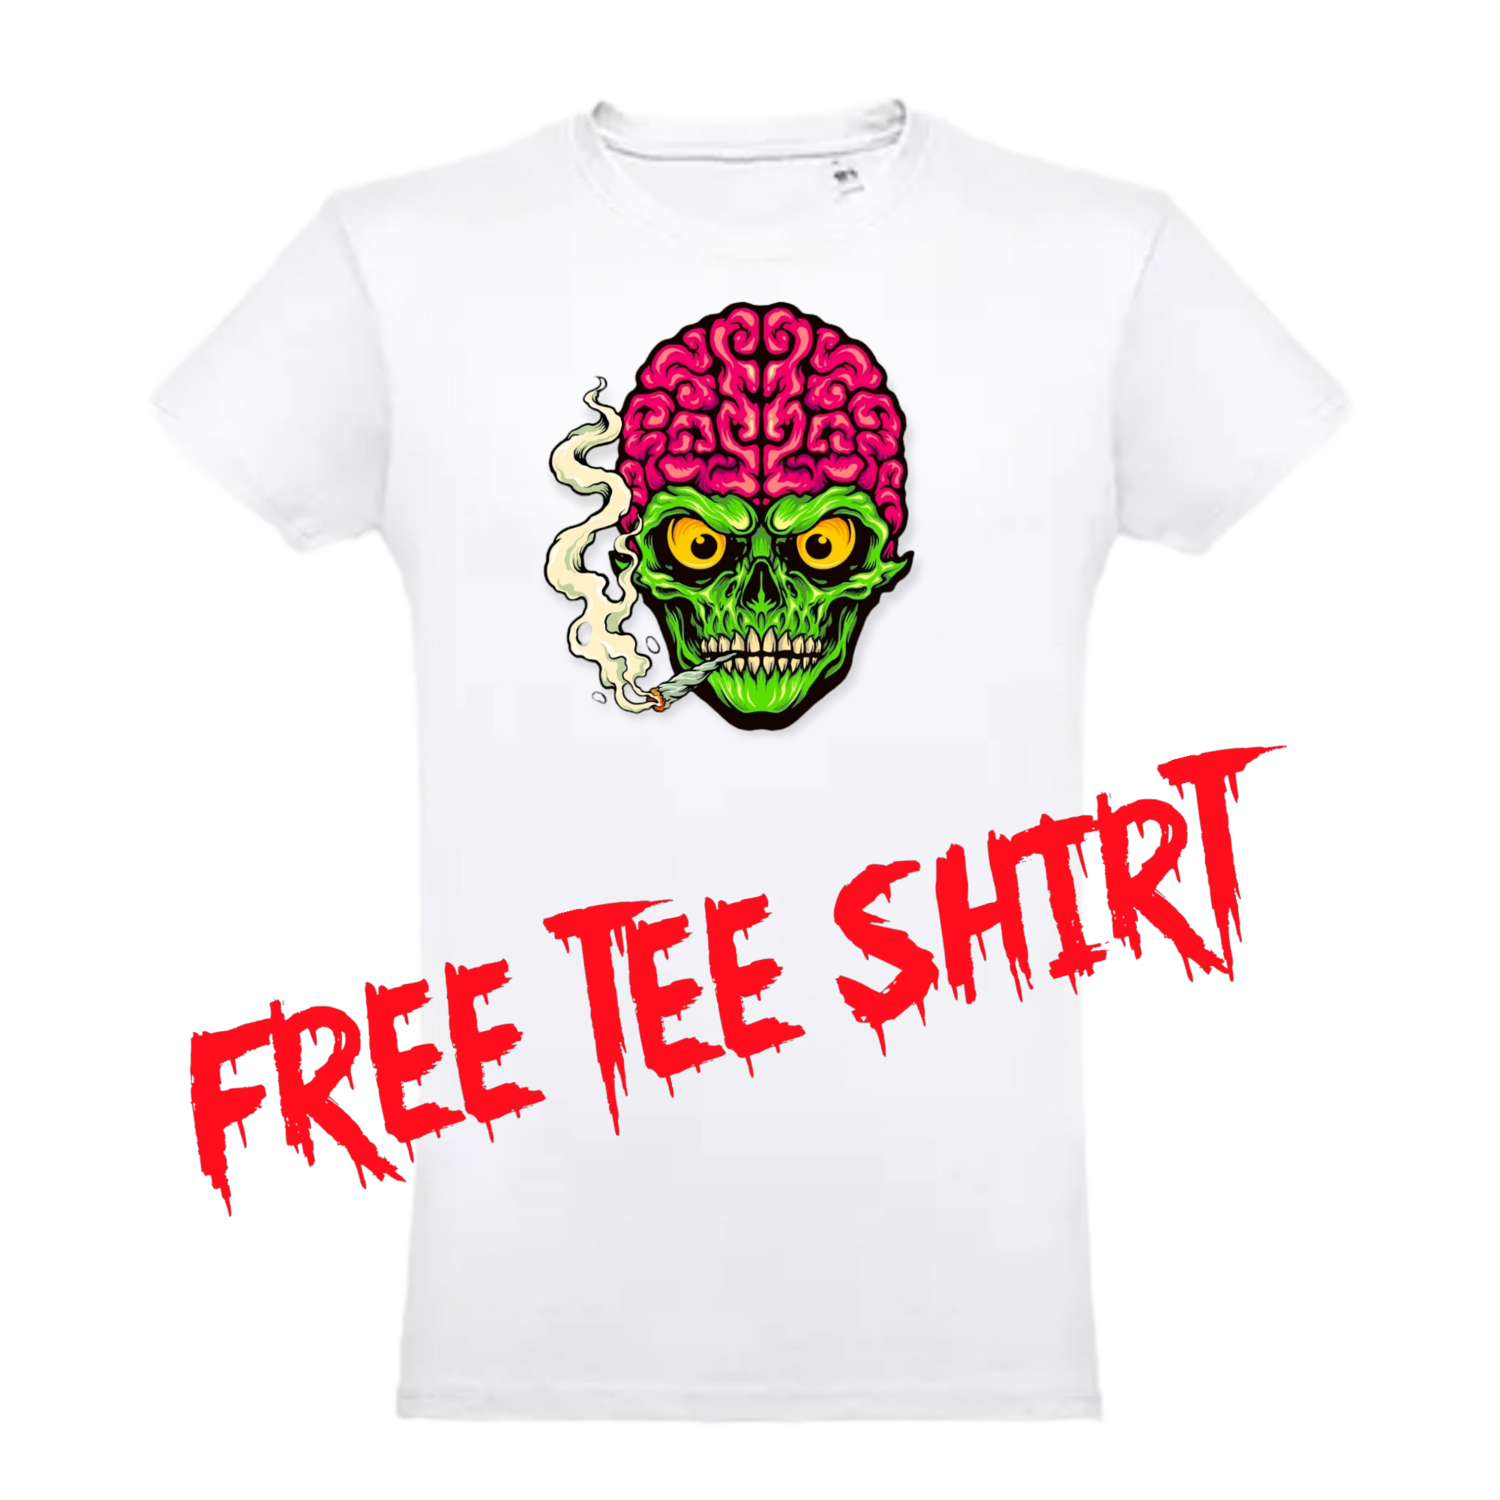 FREE tee  zkul brain limited EDITION  
Only small to xl is free anything bigger  is a lil extra